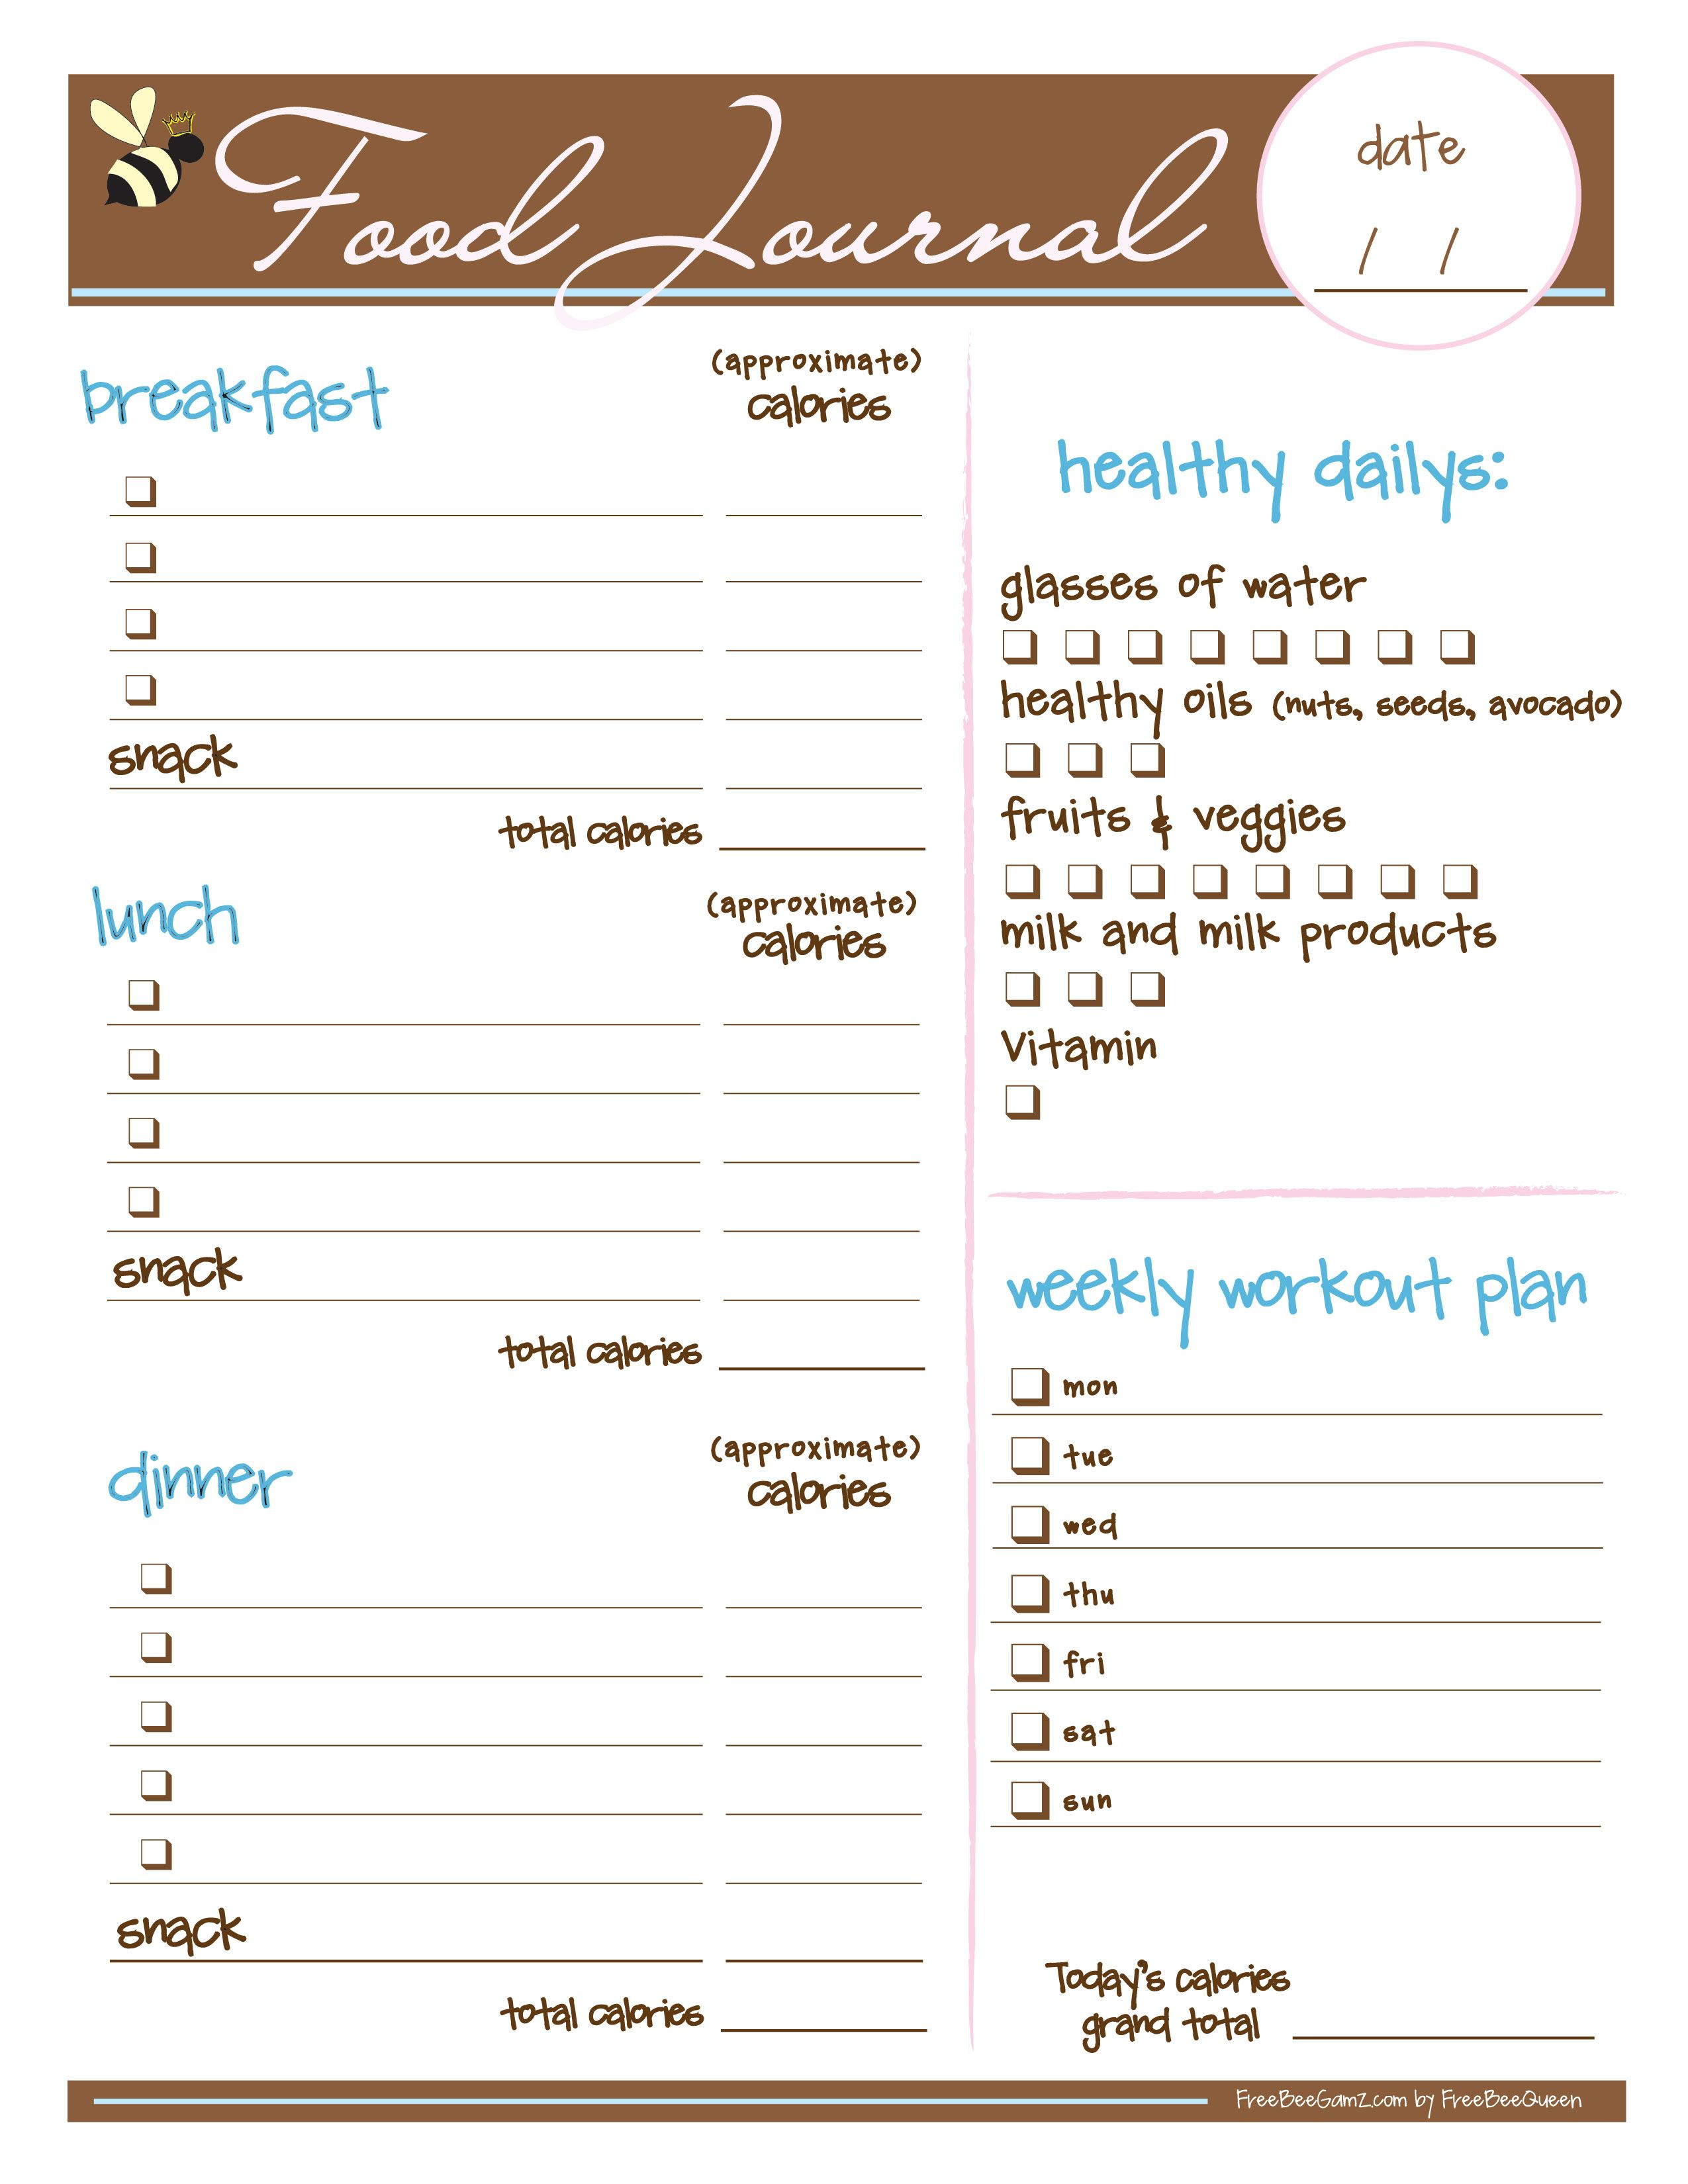 Free Food Journal. I Love This I Just Printed It And It Looks - Free Printable Calorie Counter Journal